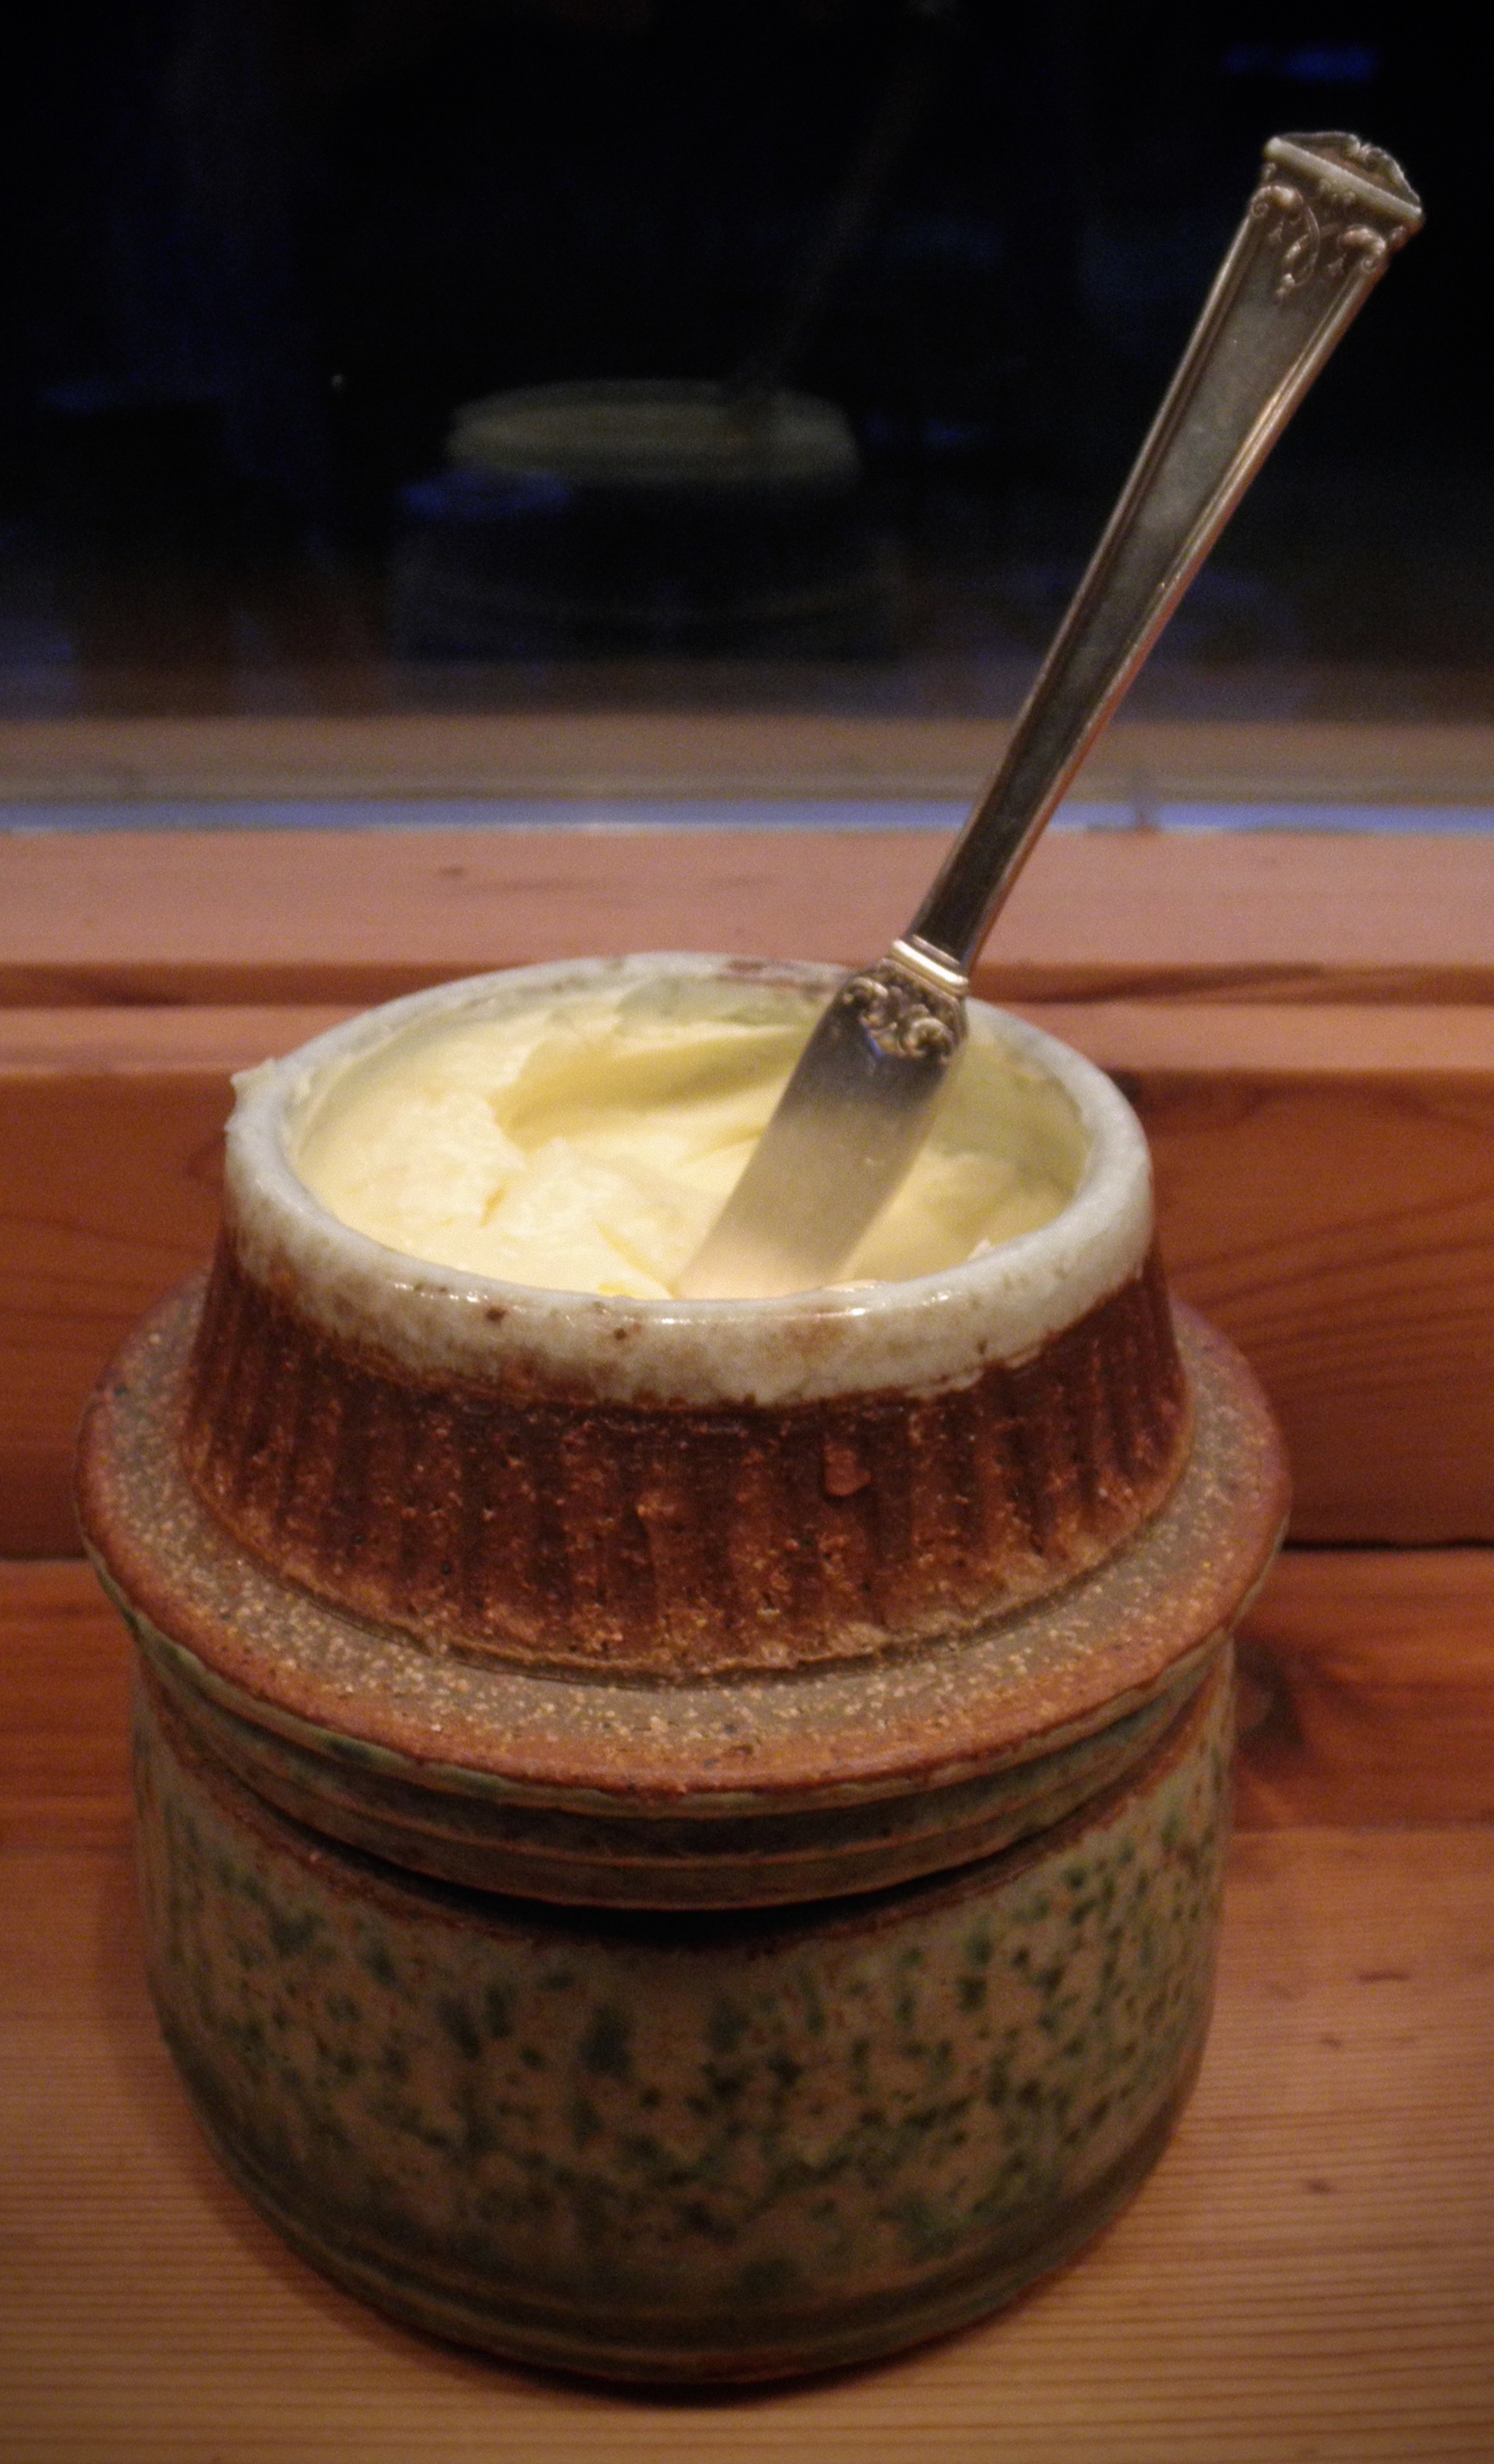 The inverted top of the Bowen Butterbell keeps soft butter perpetually ready for you!